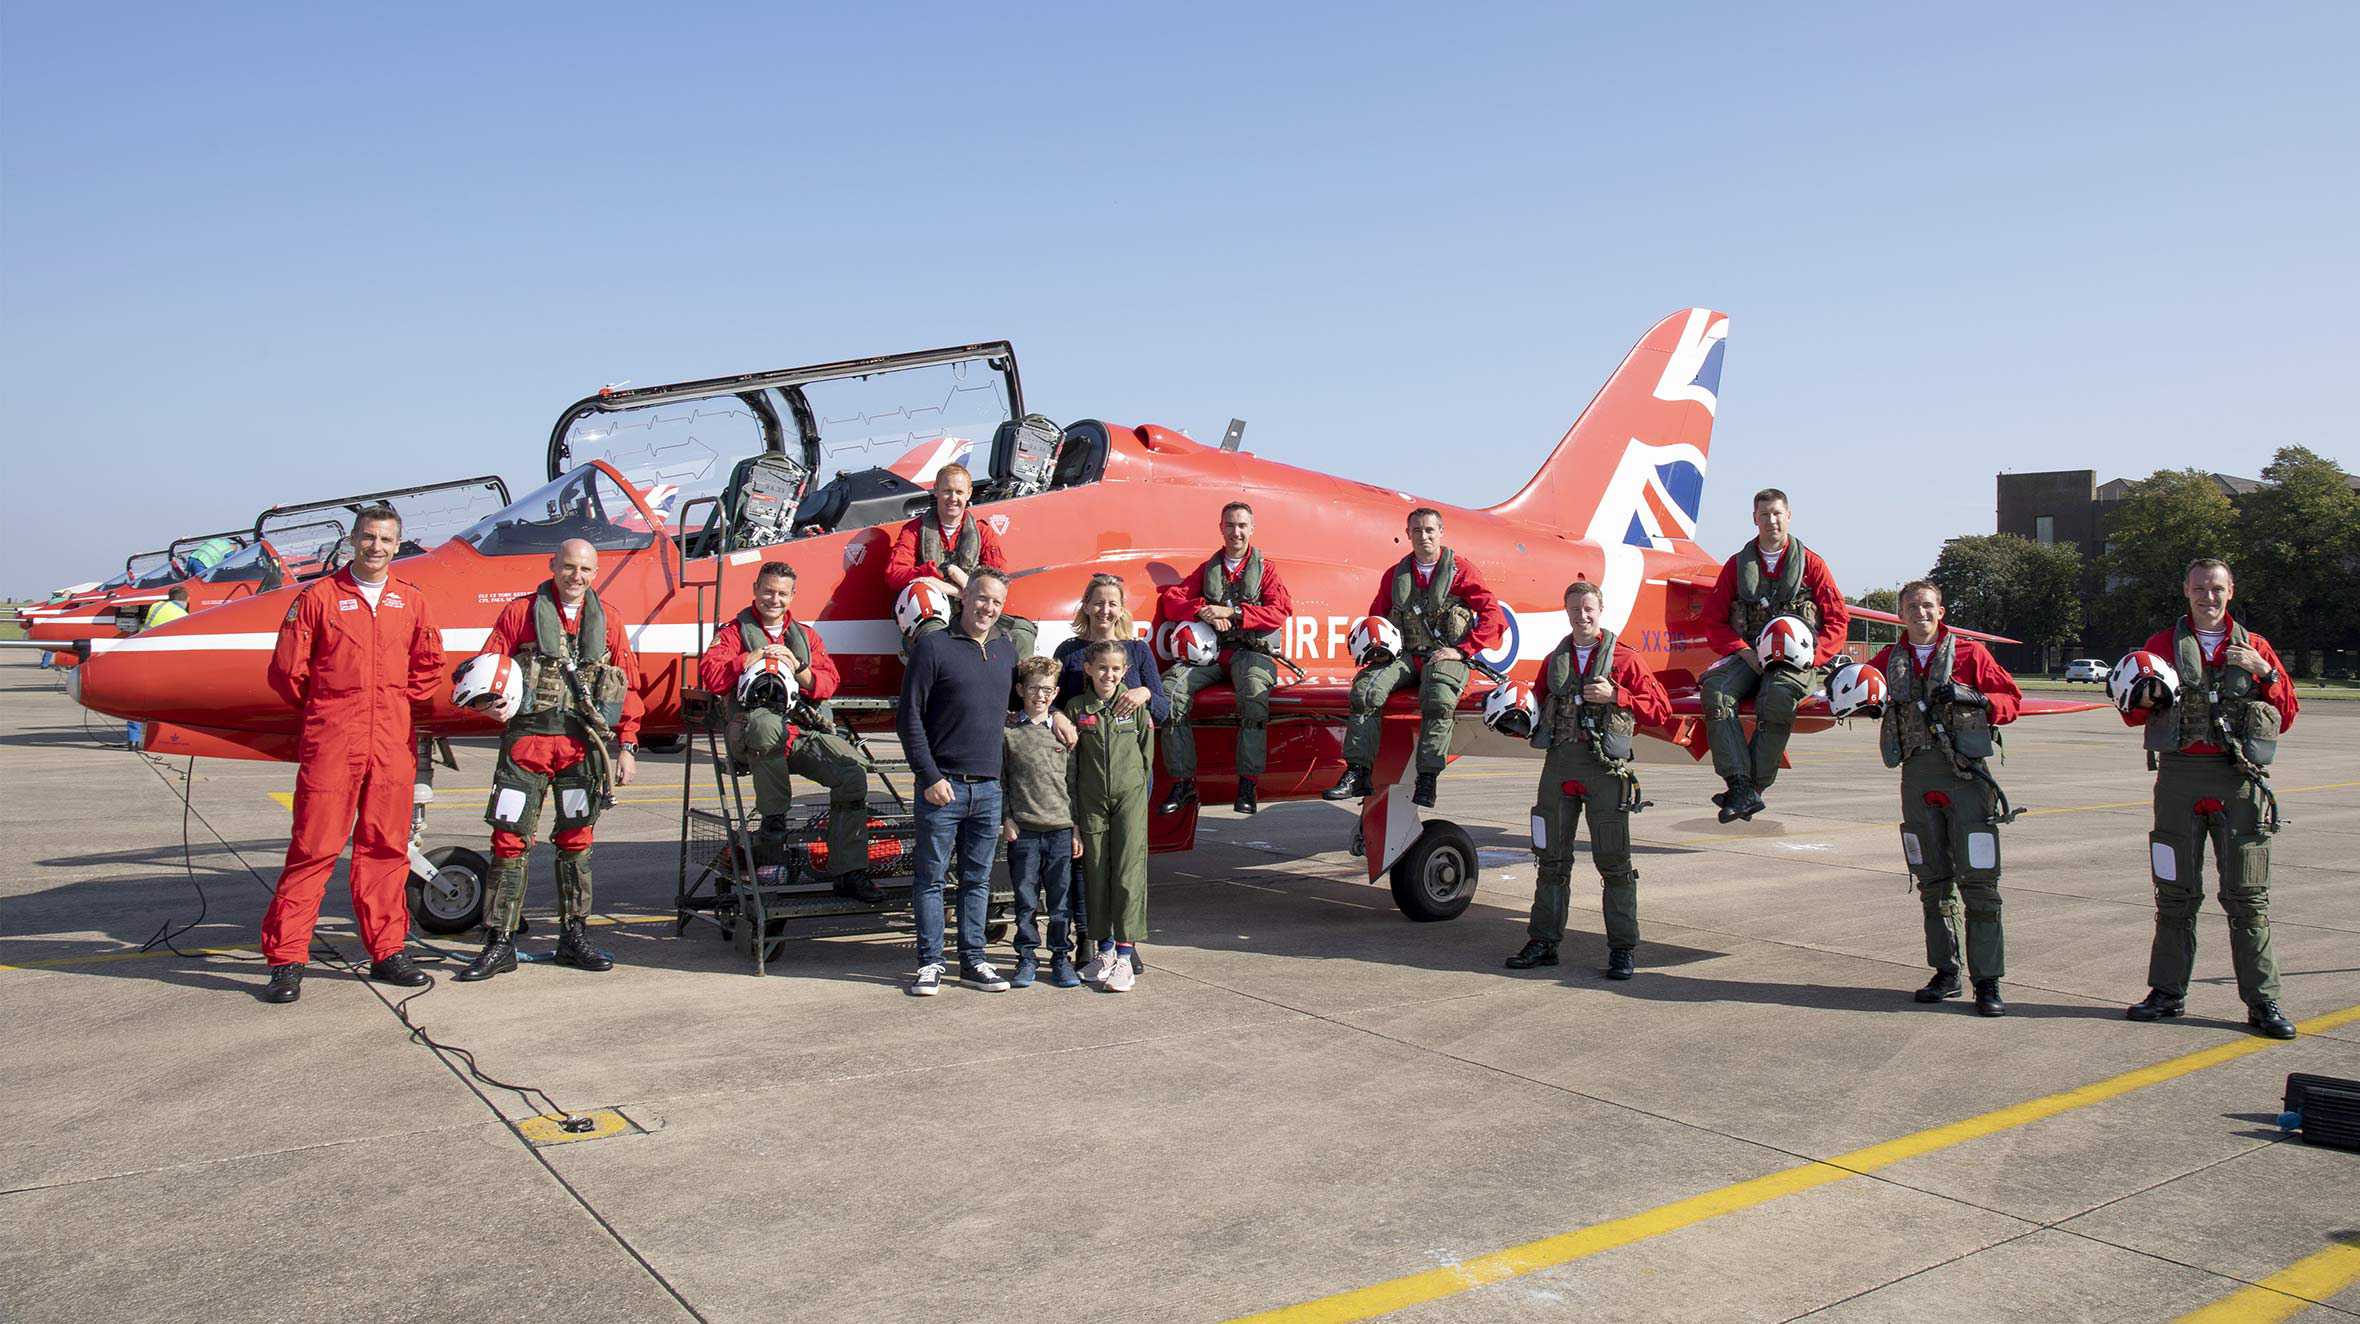 John and his family posing in front of a Red Arrows jet with the pilots and ground crew.